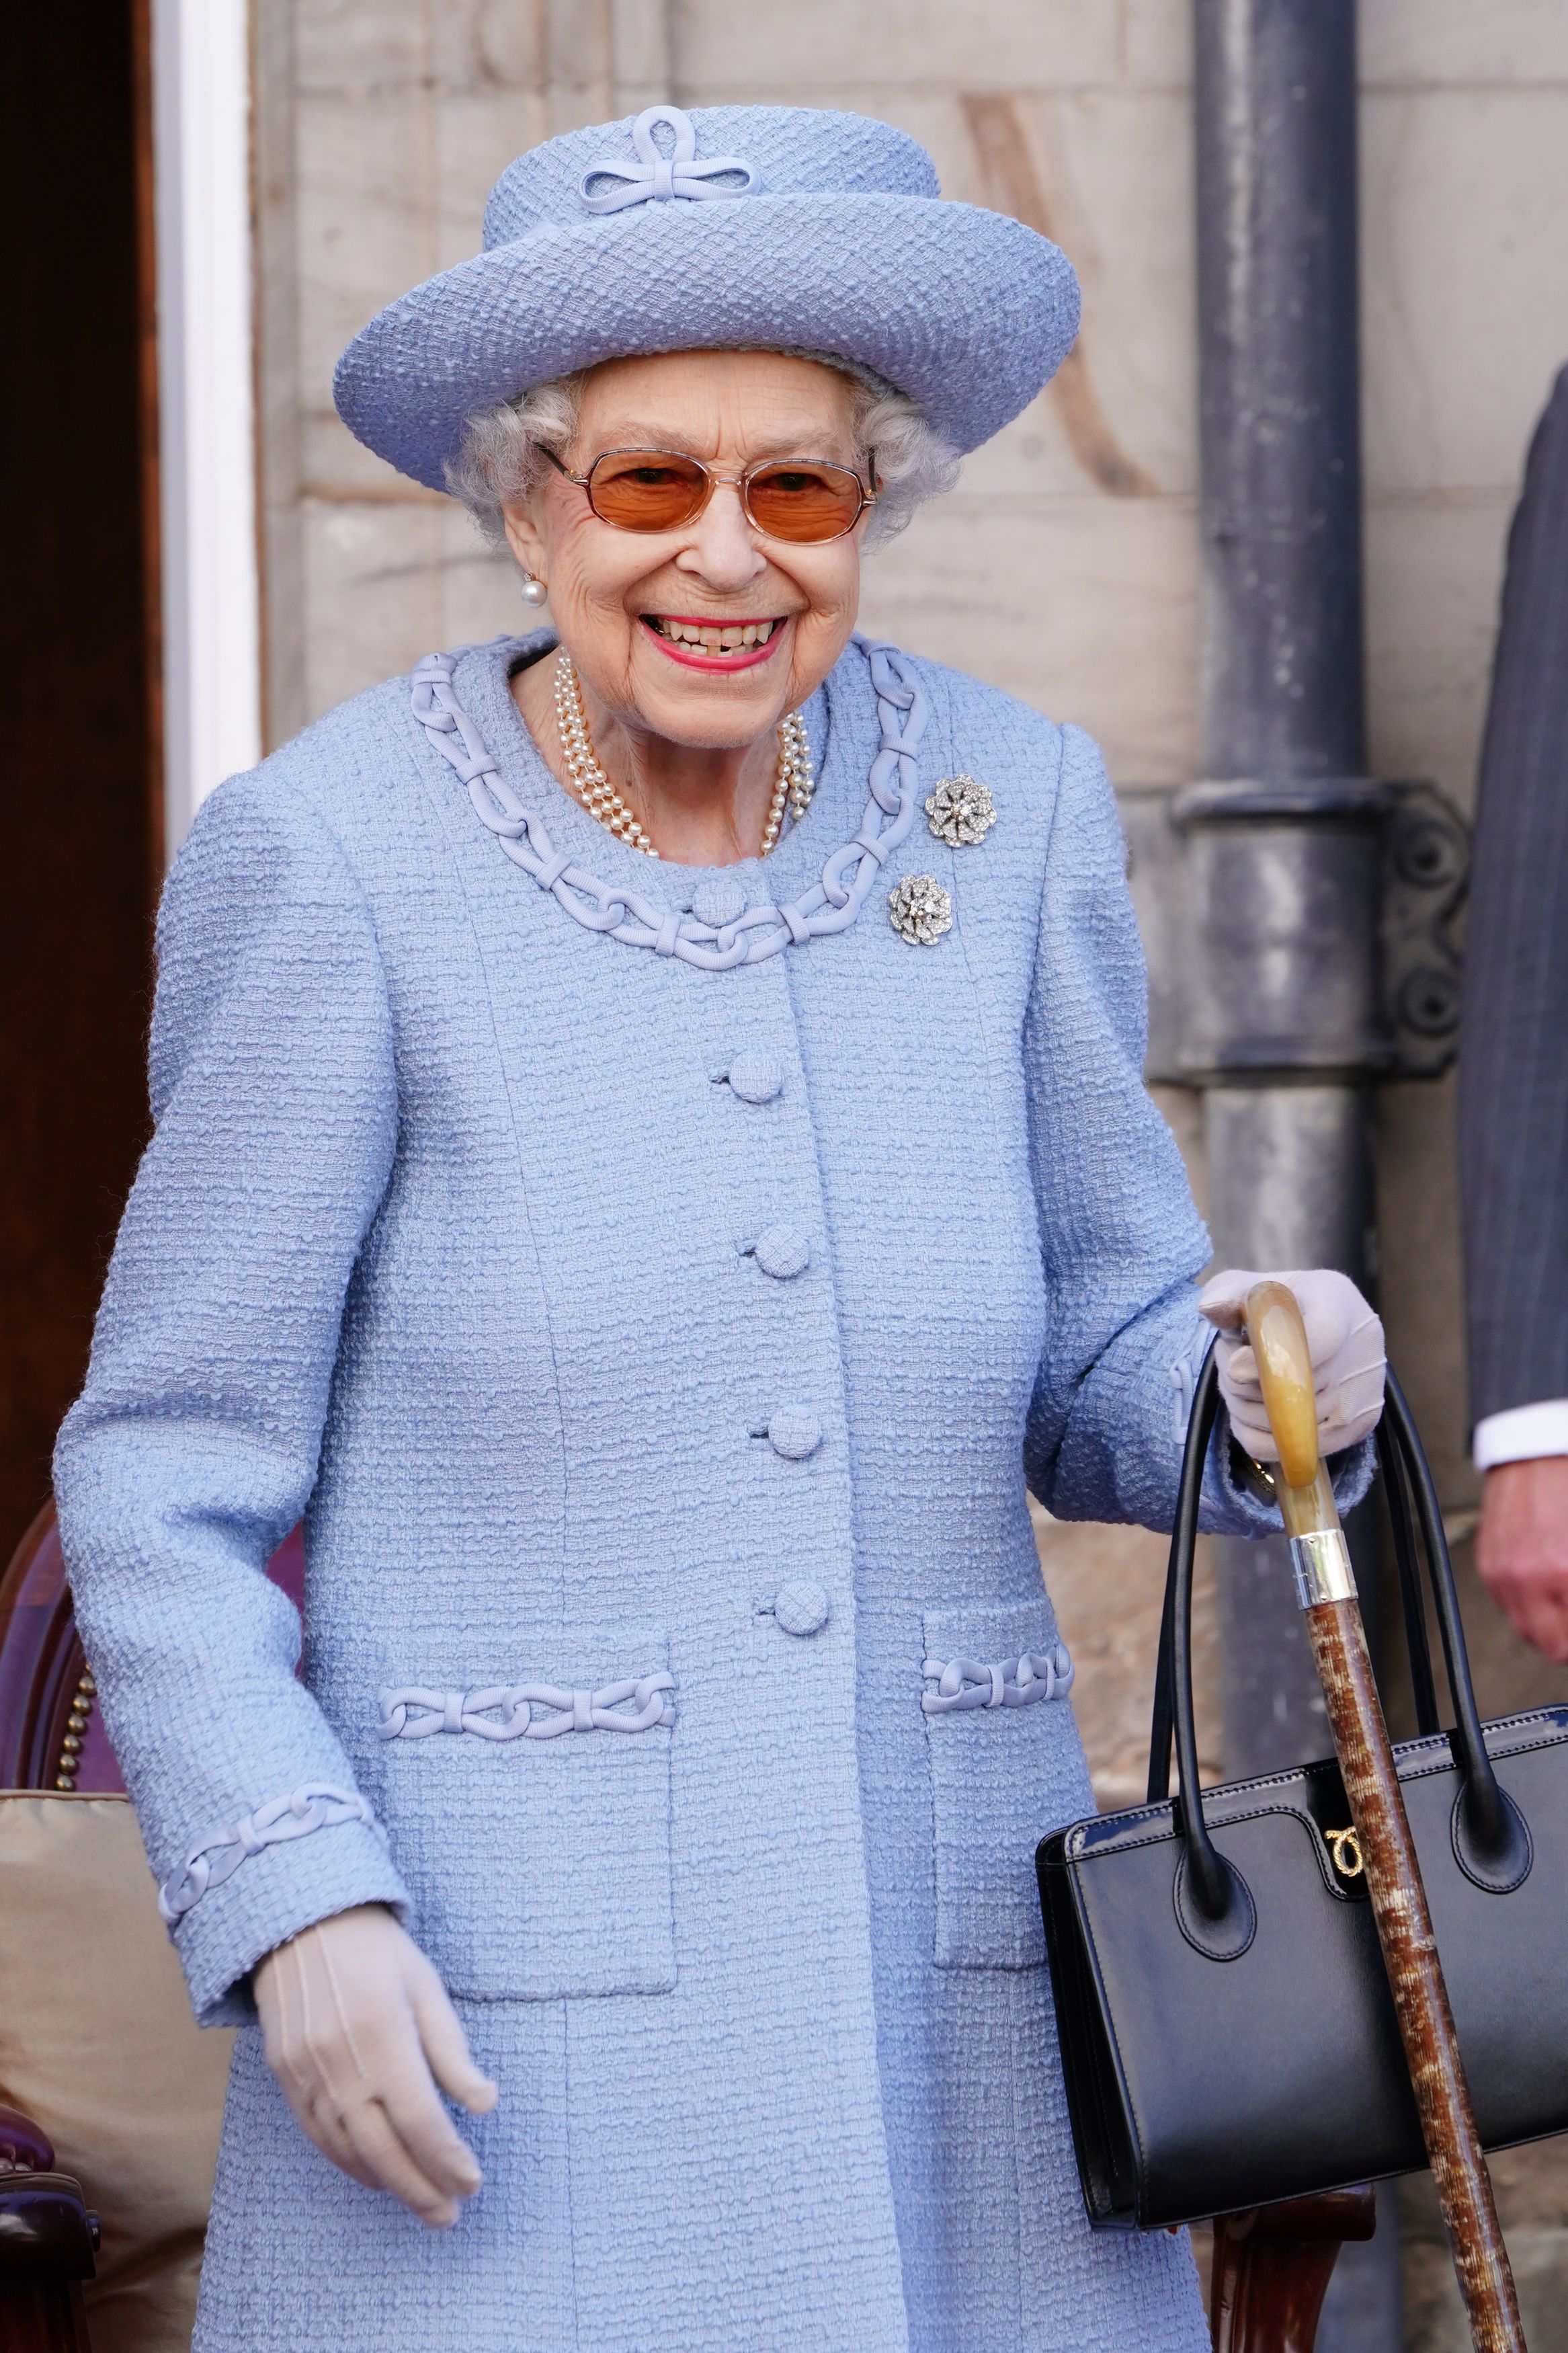 Queen Elizabeth II's iconic fashion revealed, from her brightly colored  dresses to her signature handbag